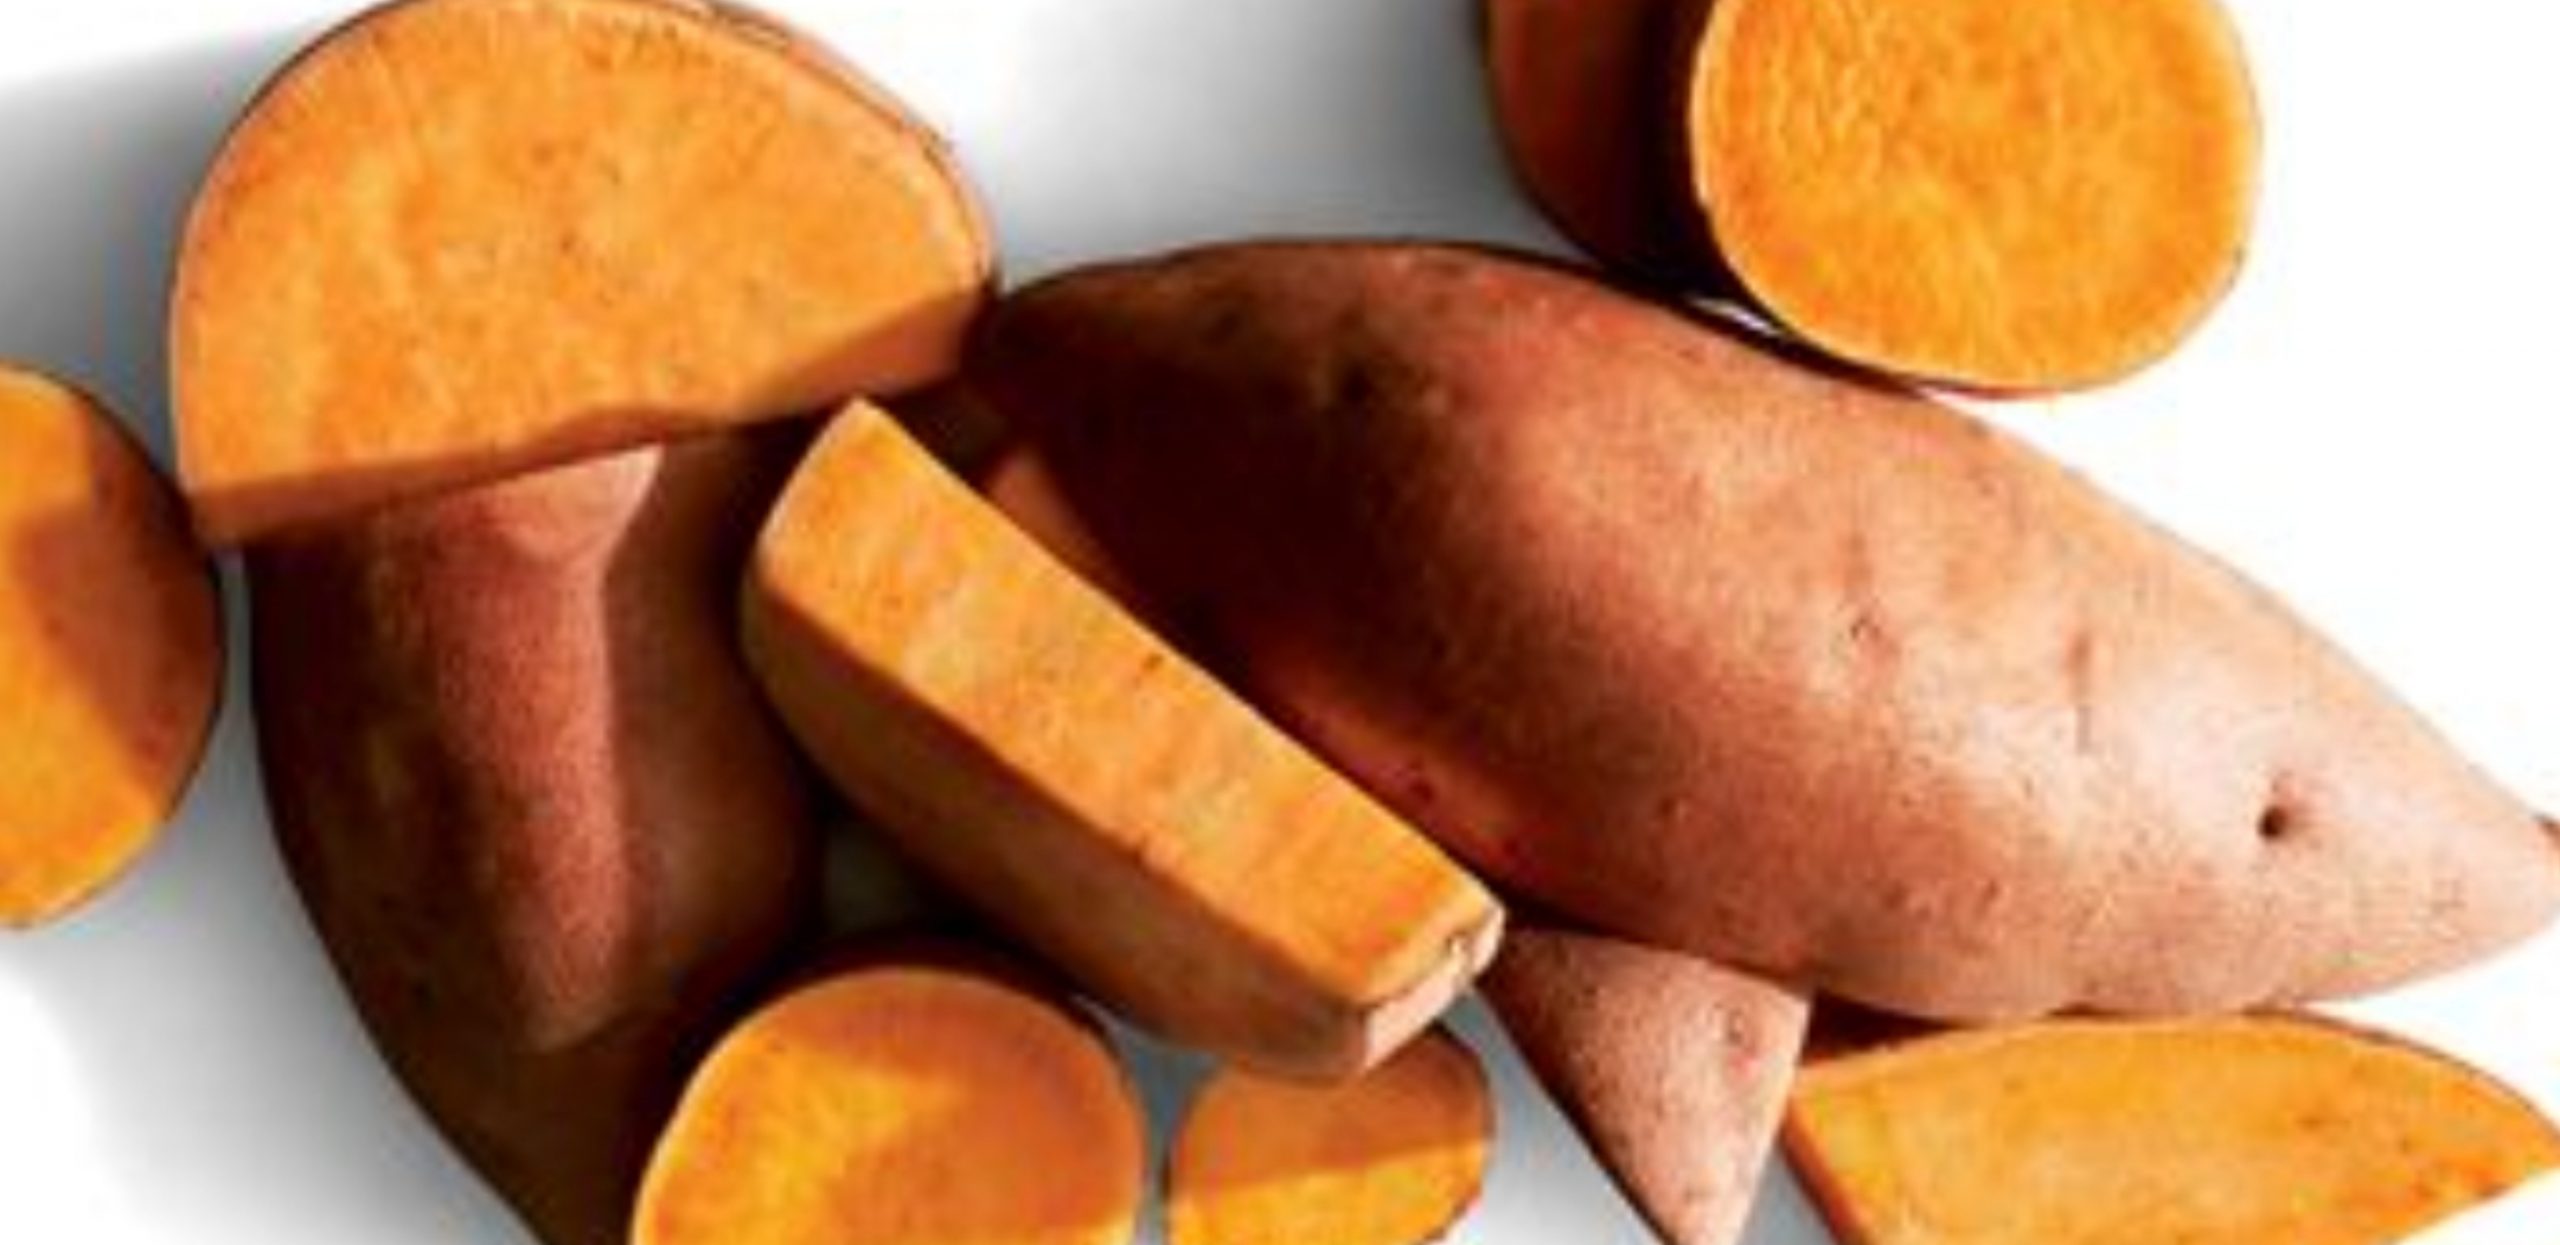 Sweet Potatoes for Runners. These orange beauties get their glowing hue from the antioxidant beta-carotene, which your body converts to vitamin A. Both beta-carotene and vitamin A are responsible for maintaining eye health, protecting against sun damage, and boosting immunity.